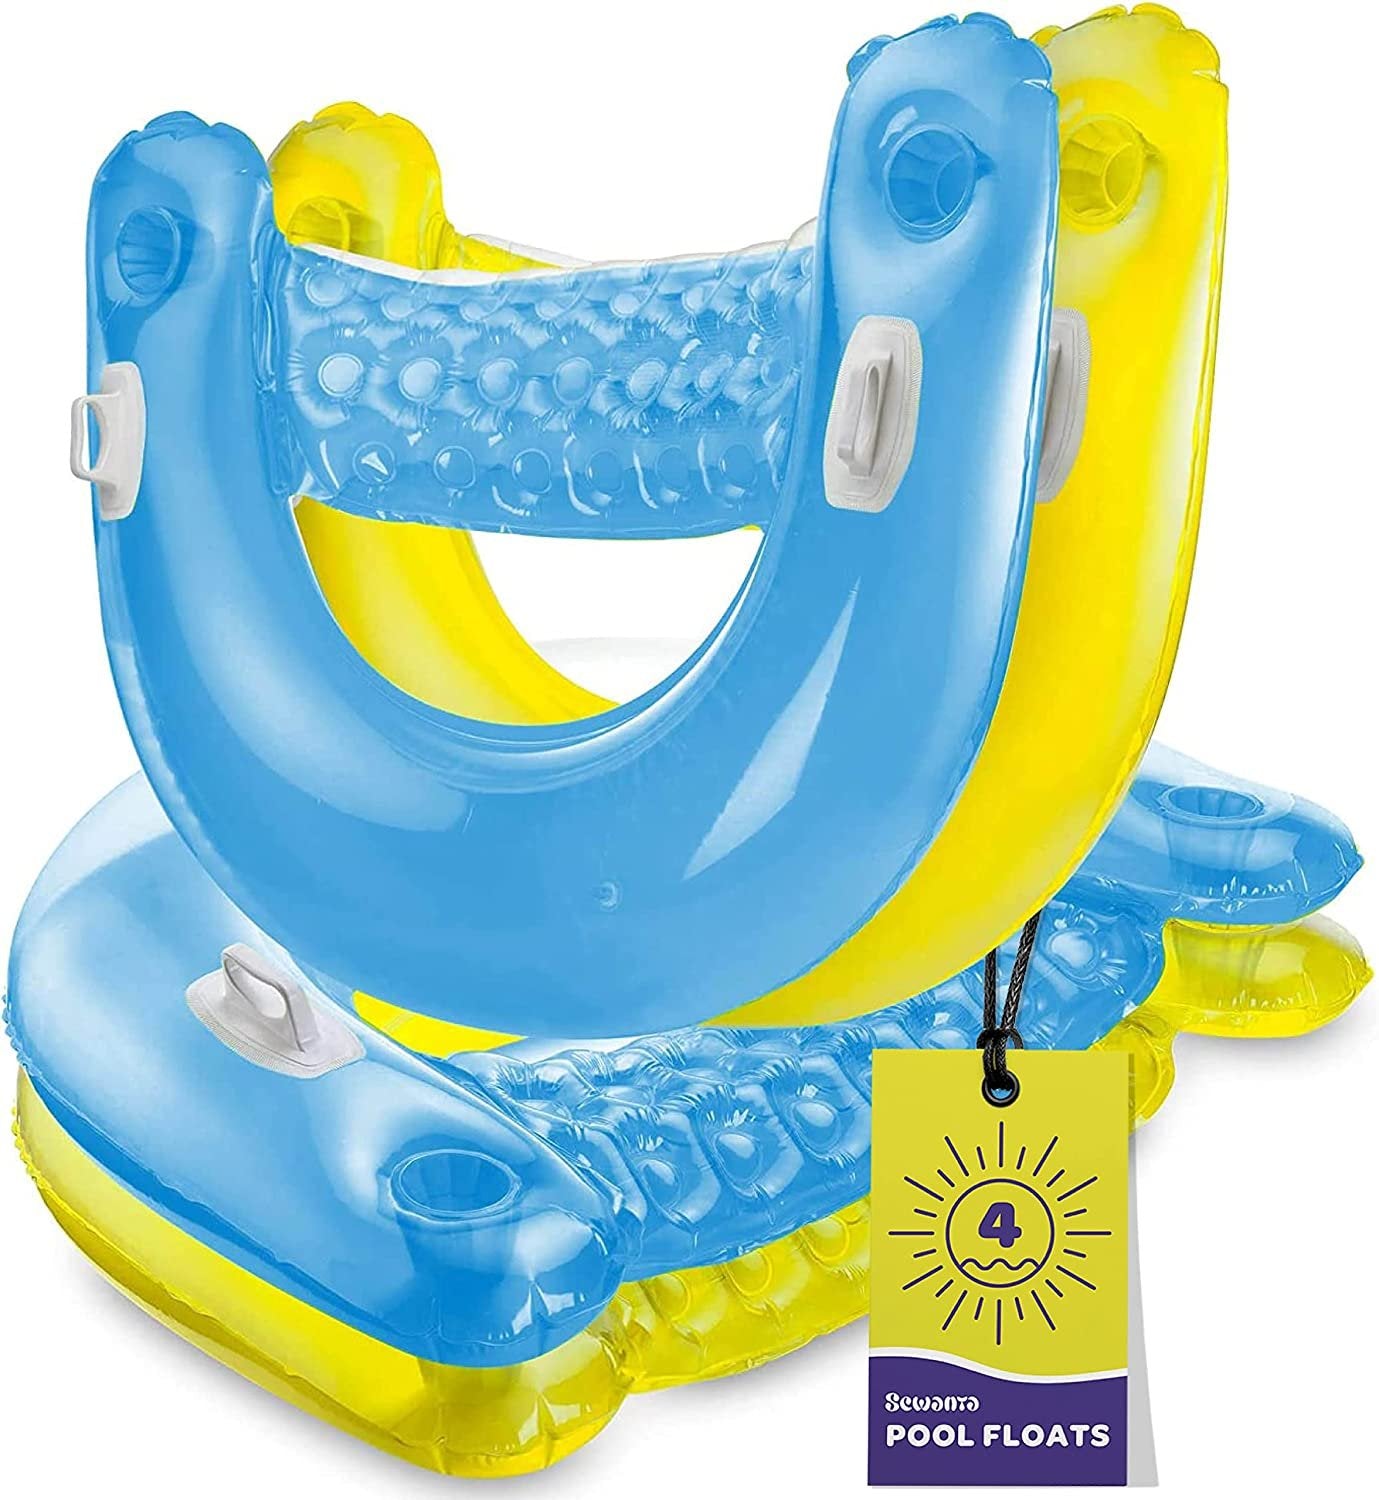 Pool Floats Adult Inflatable Chair Floats with Cup Holders & Handles - Happy Colorful Pool Floaties - Pool Float Comes in 2 Fun Colors, Blue & Yellow,